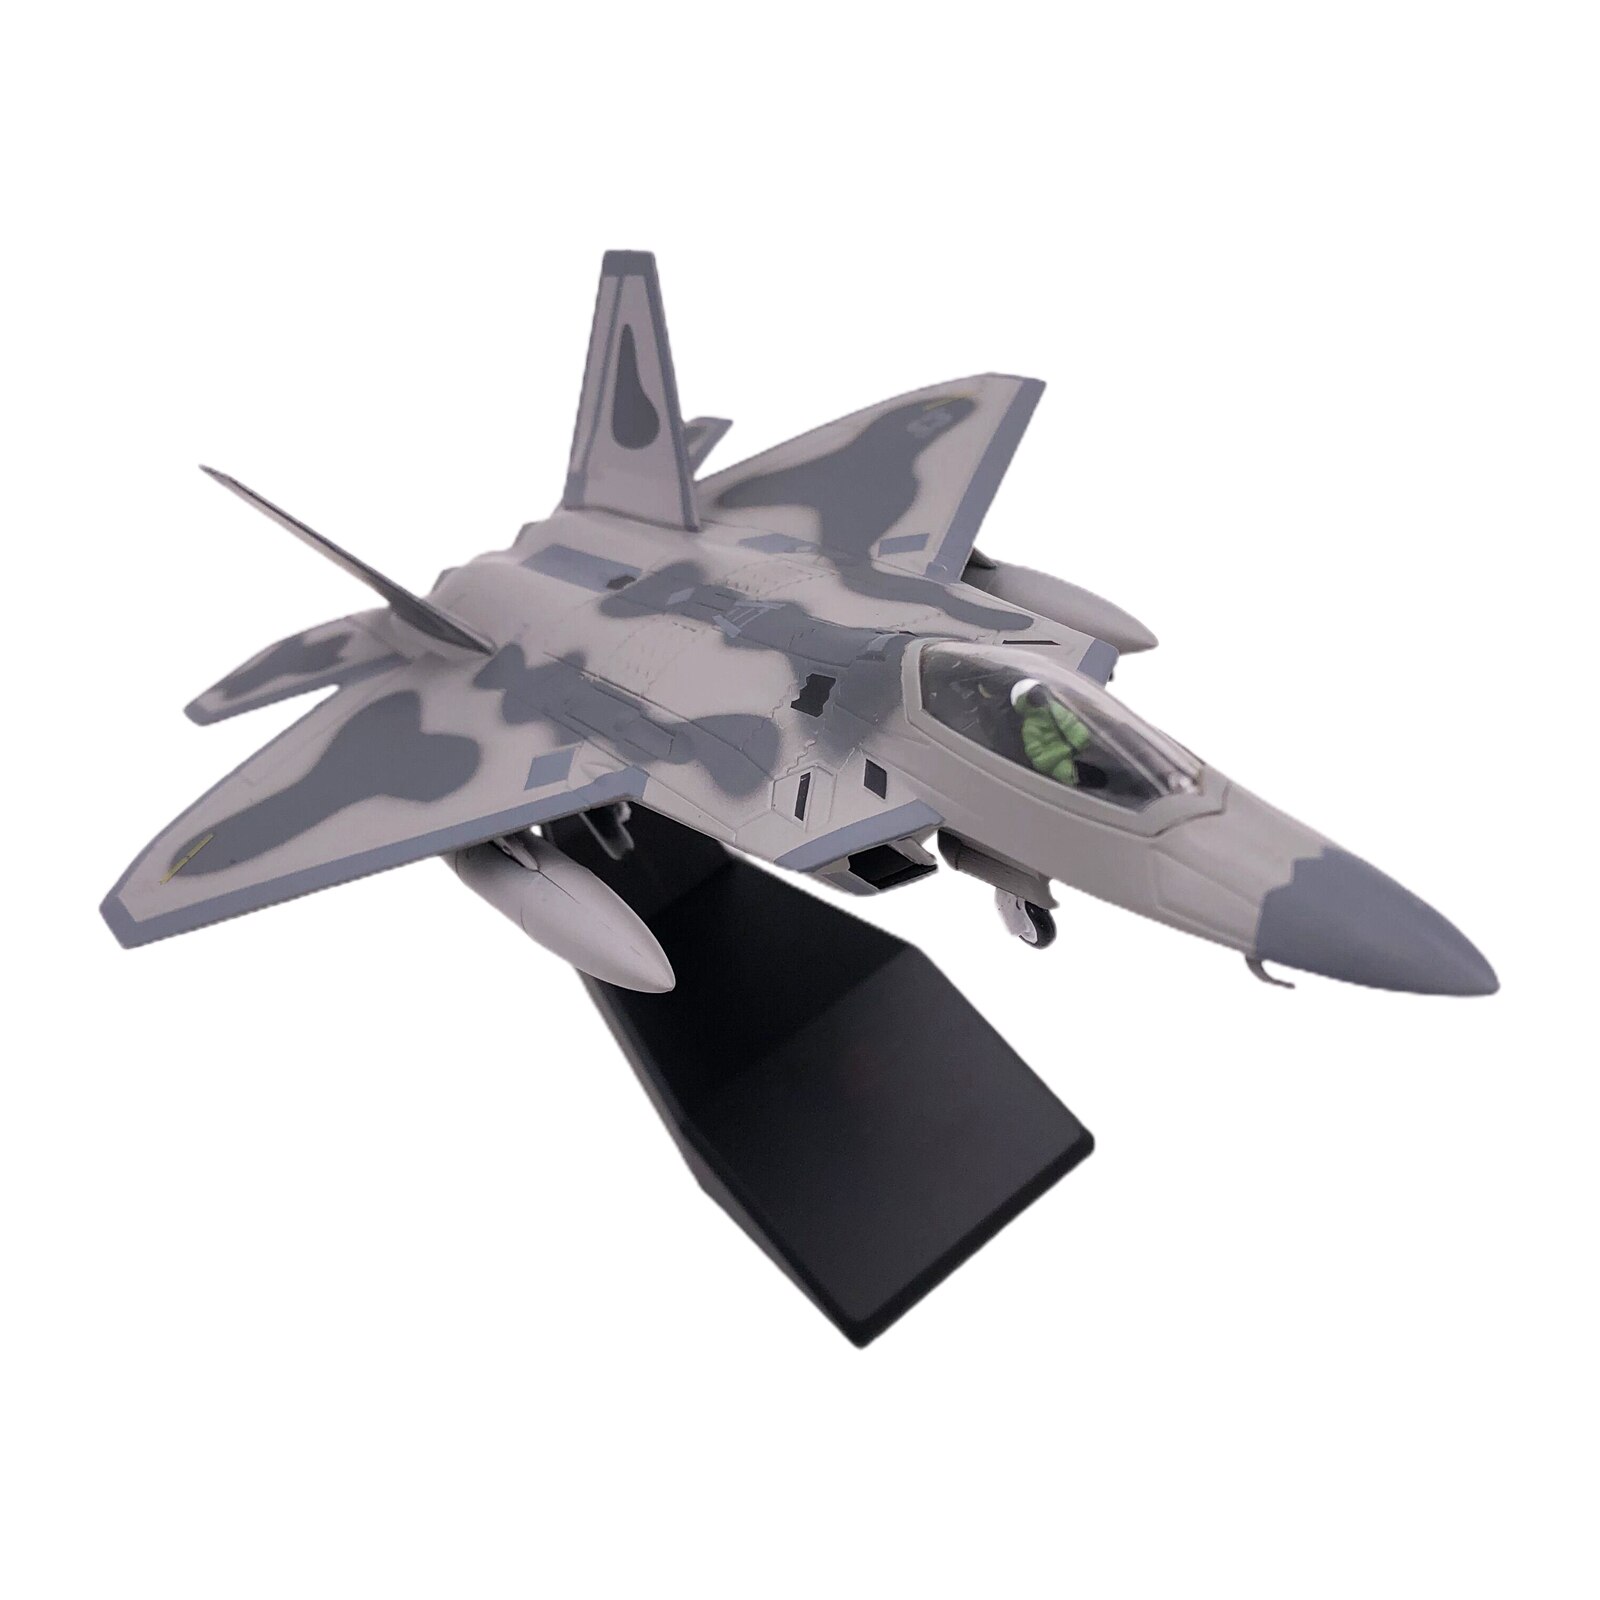 1:100 Scale American F-22 Fighter Raptor Airplane Model Aircraft Model Toy Kid Gift alx